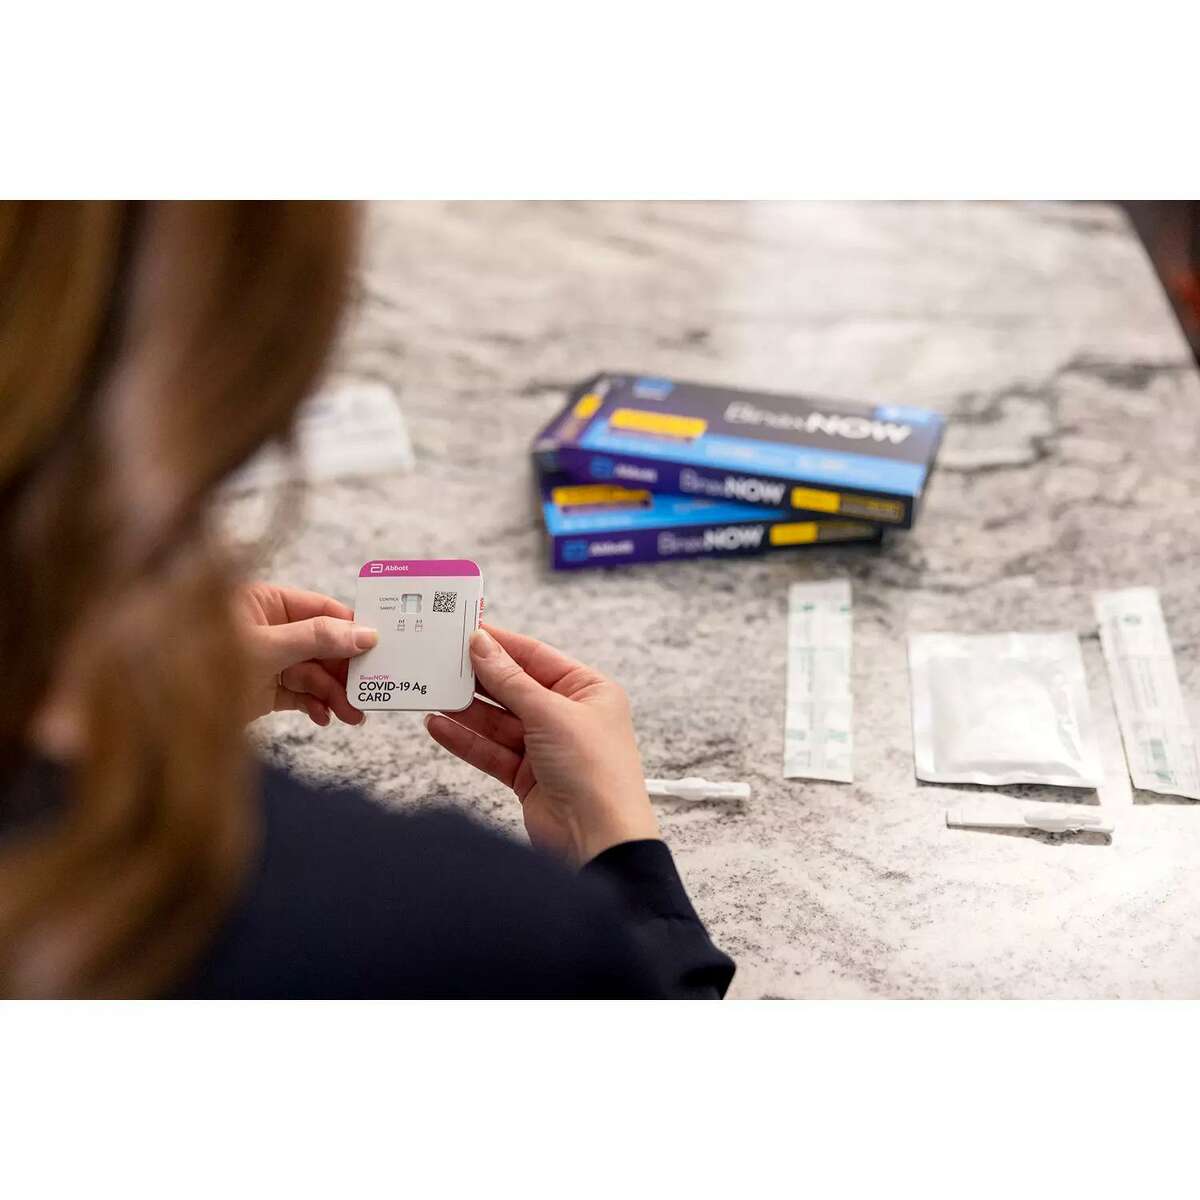 Major retailers are now selling over-the-counter coronavirus tests, which can detect proteins from the virus that causes COVID-19. BinaxNOW COVID‐19 Antigen Self Tests, which costs between $23 and $19 contains two tests in the box and allows consumers to get with results in about 15 minutes.